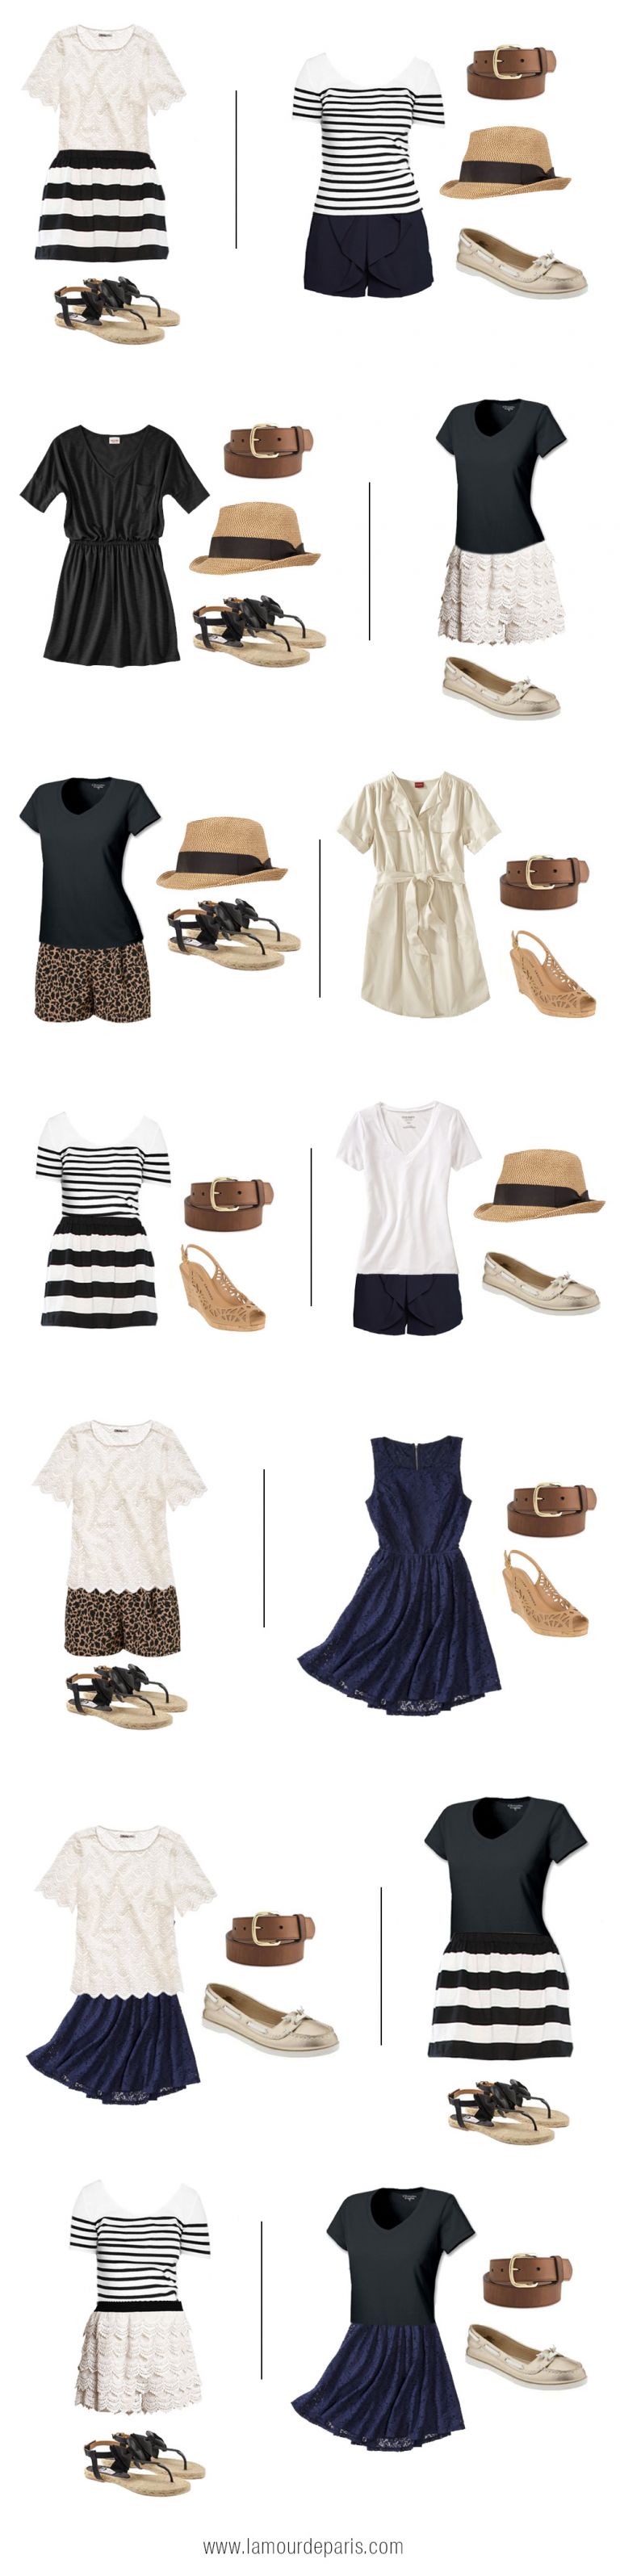 What to Wear in Paris in Summer? Outfit Guide